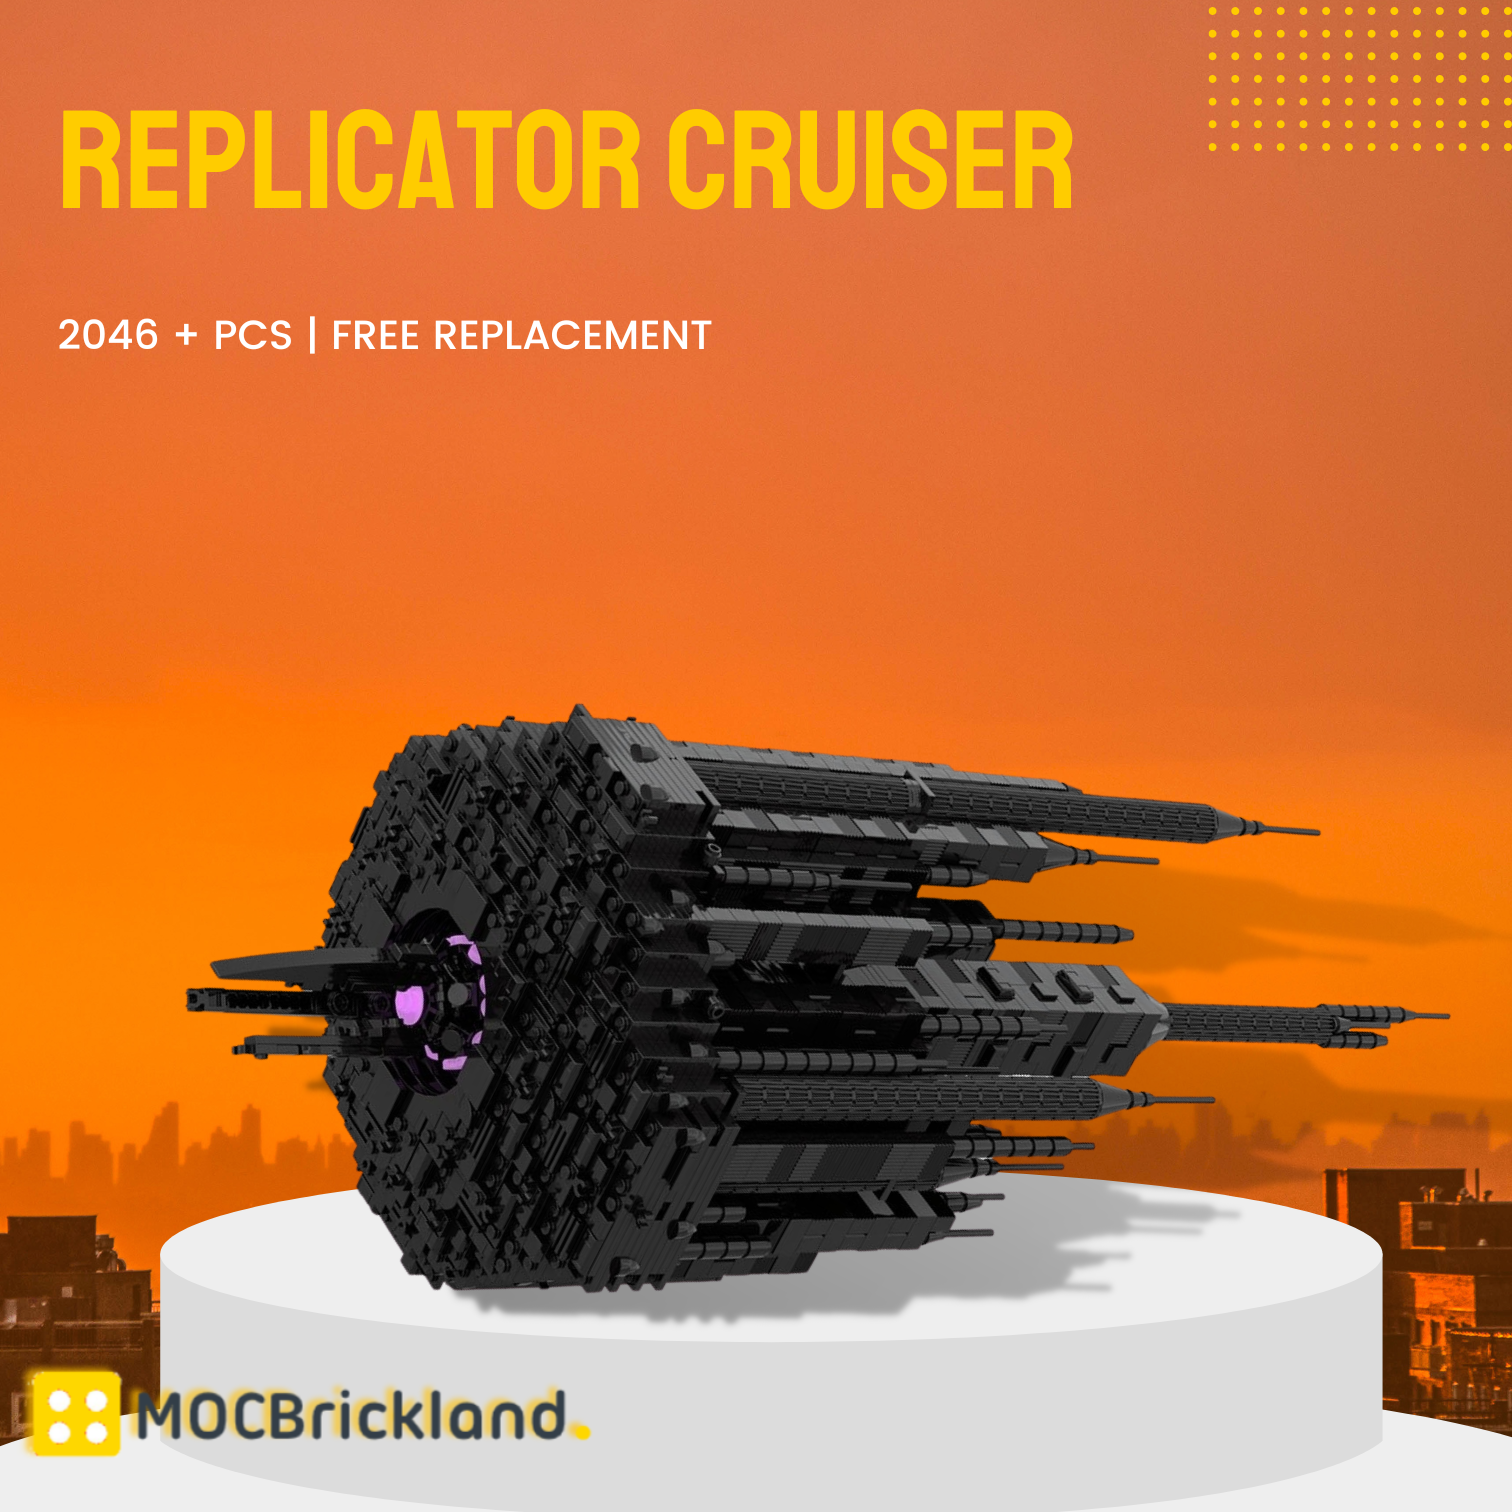 Replicator Cruiser MOC-125965 Space With 2046 Pieces